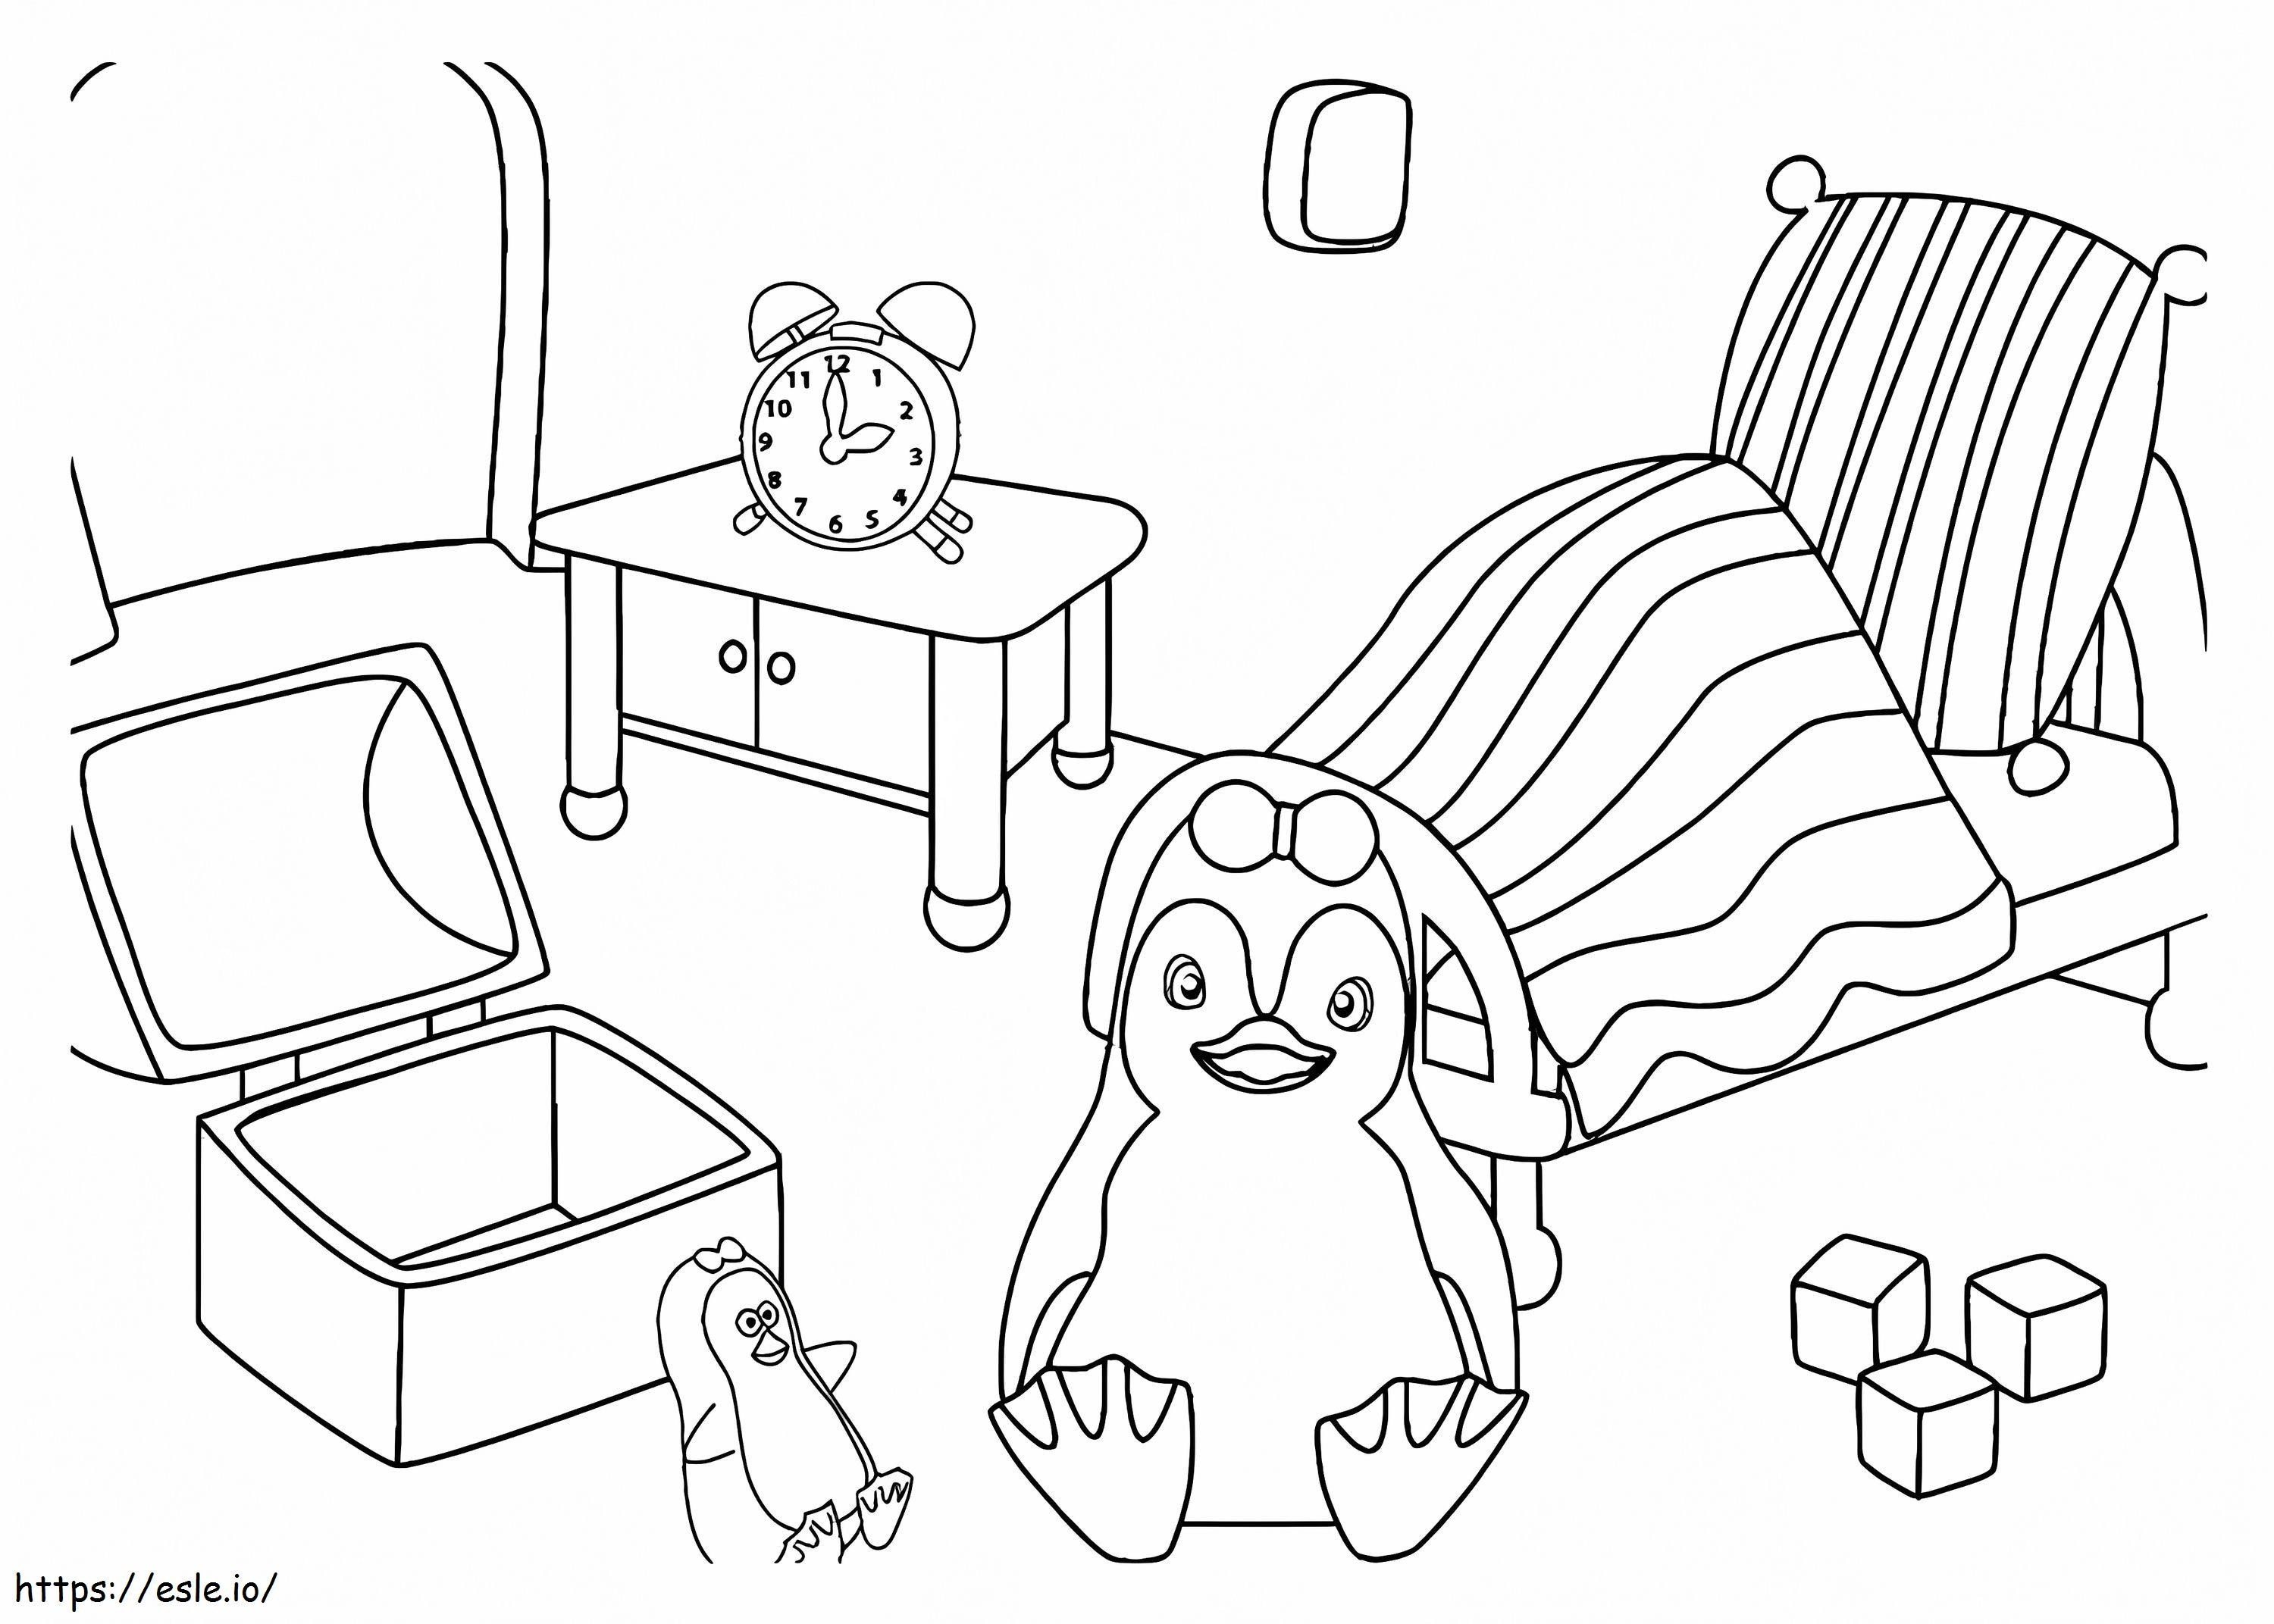 Book 11 coloring page